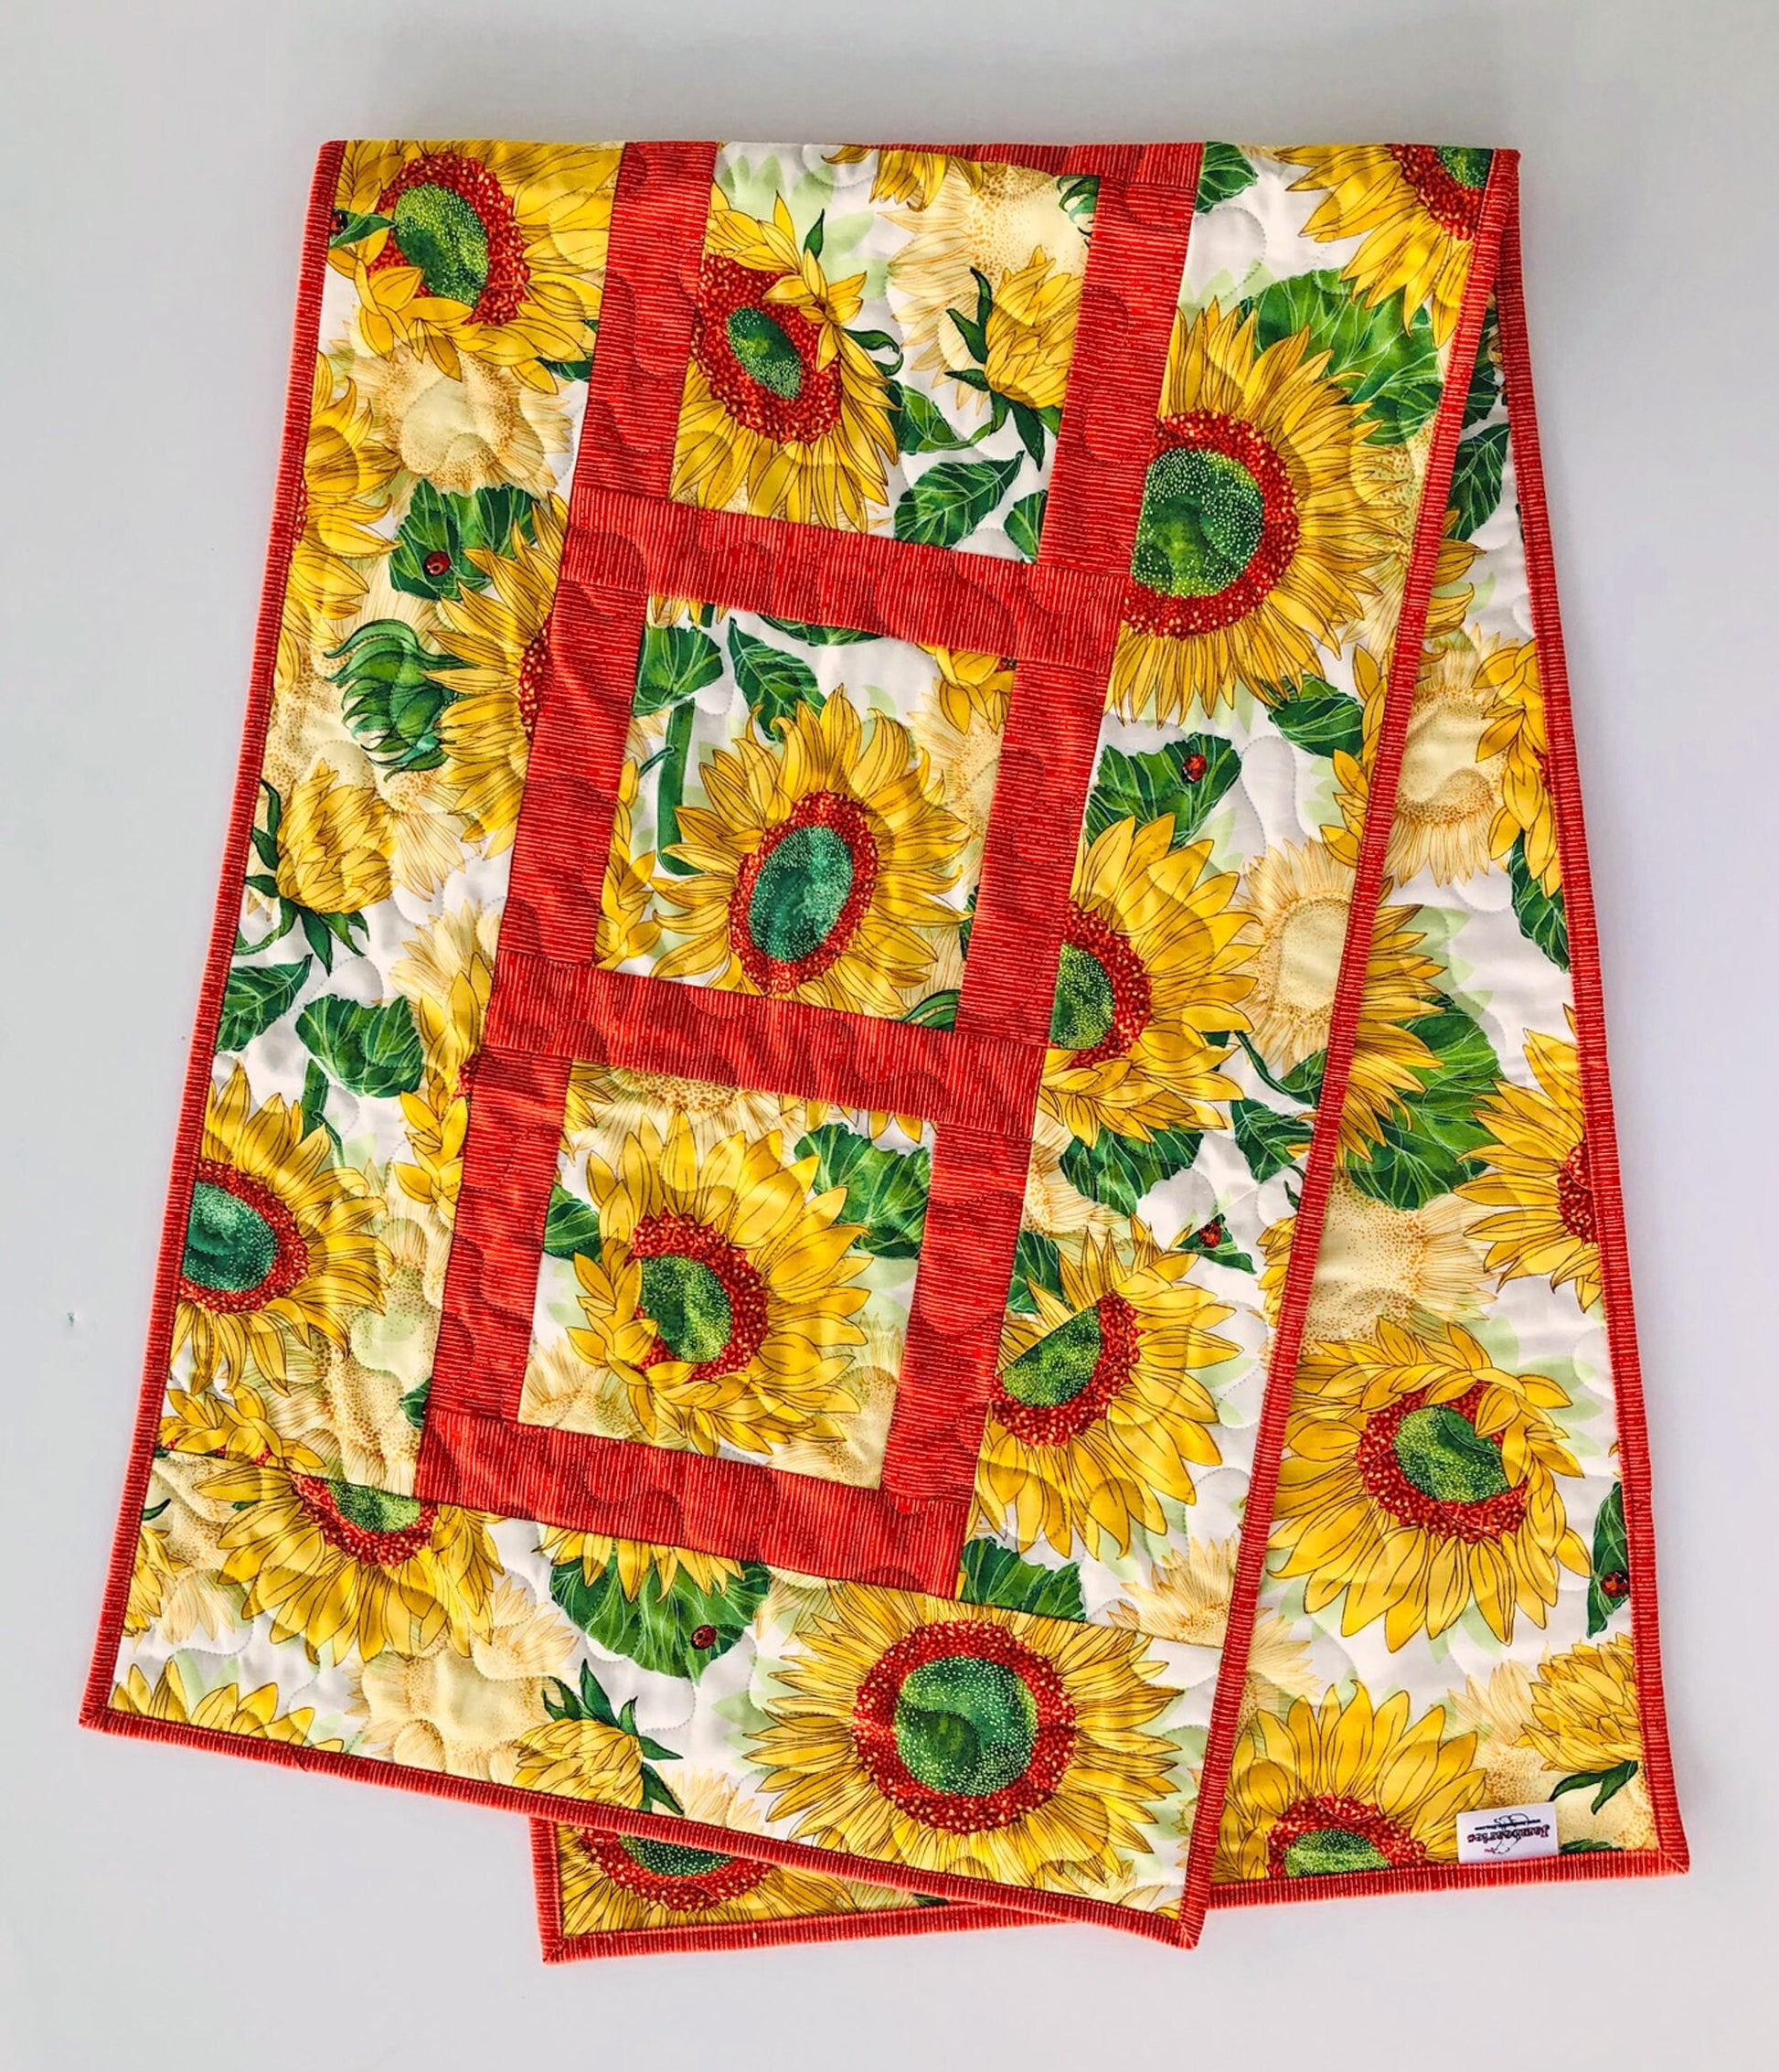 Yellow Sunflowers Quilted Table Runner, 18" x 54.75", Solana Quilted Table Topper Quilt, Yellow Orange Green Floral Table Runner